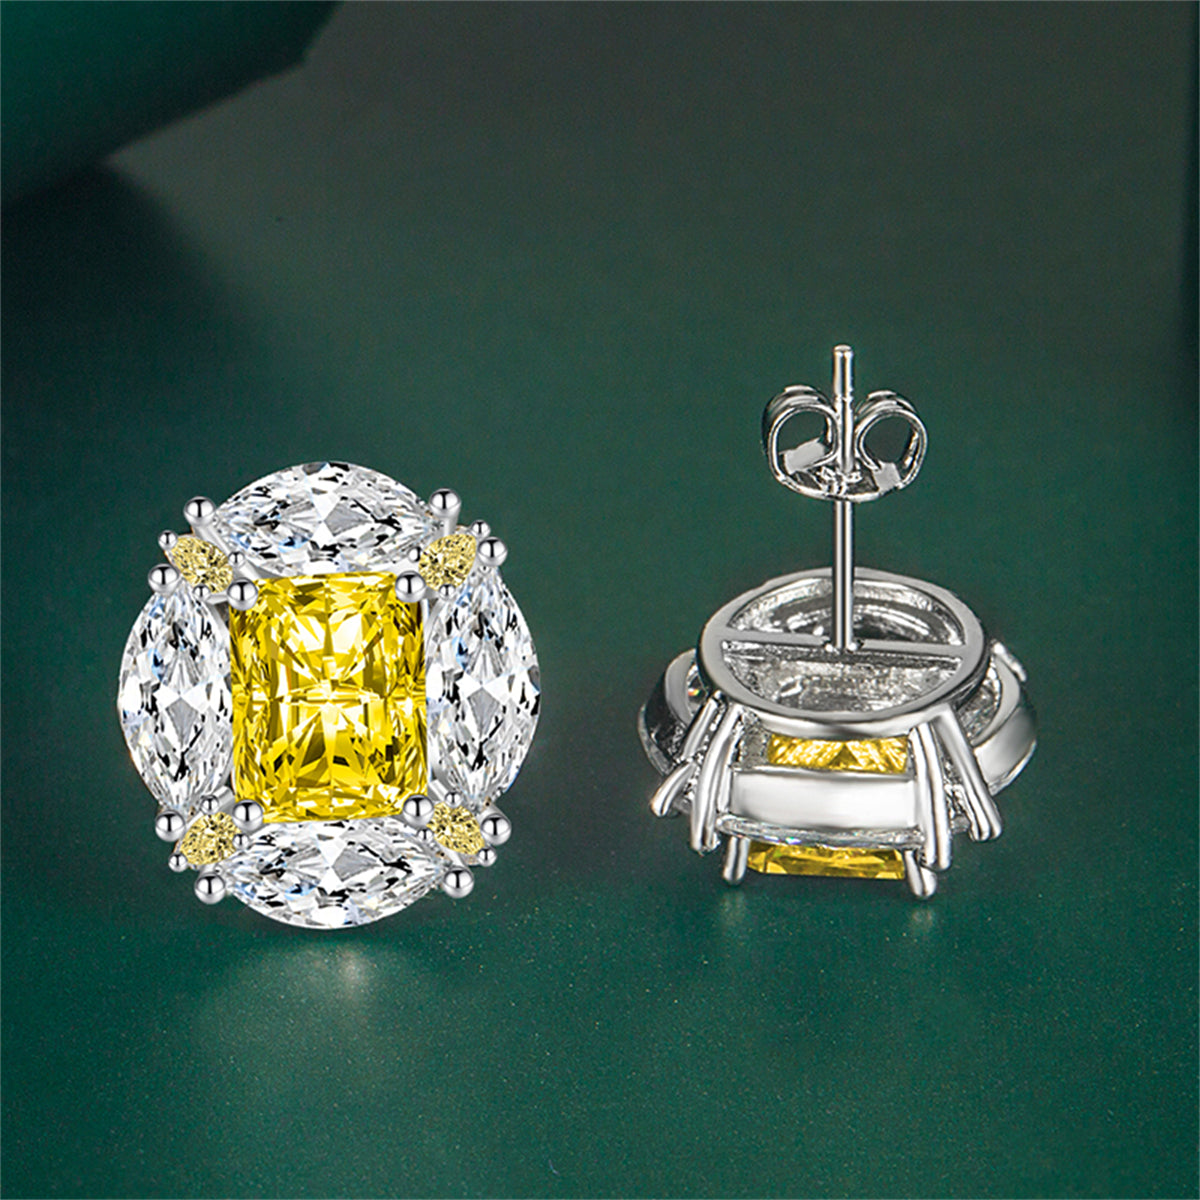 Yellow Radiant & Marquise Crystal Silver-Plated Oval Stud Earrings